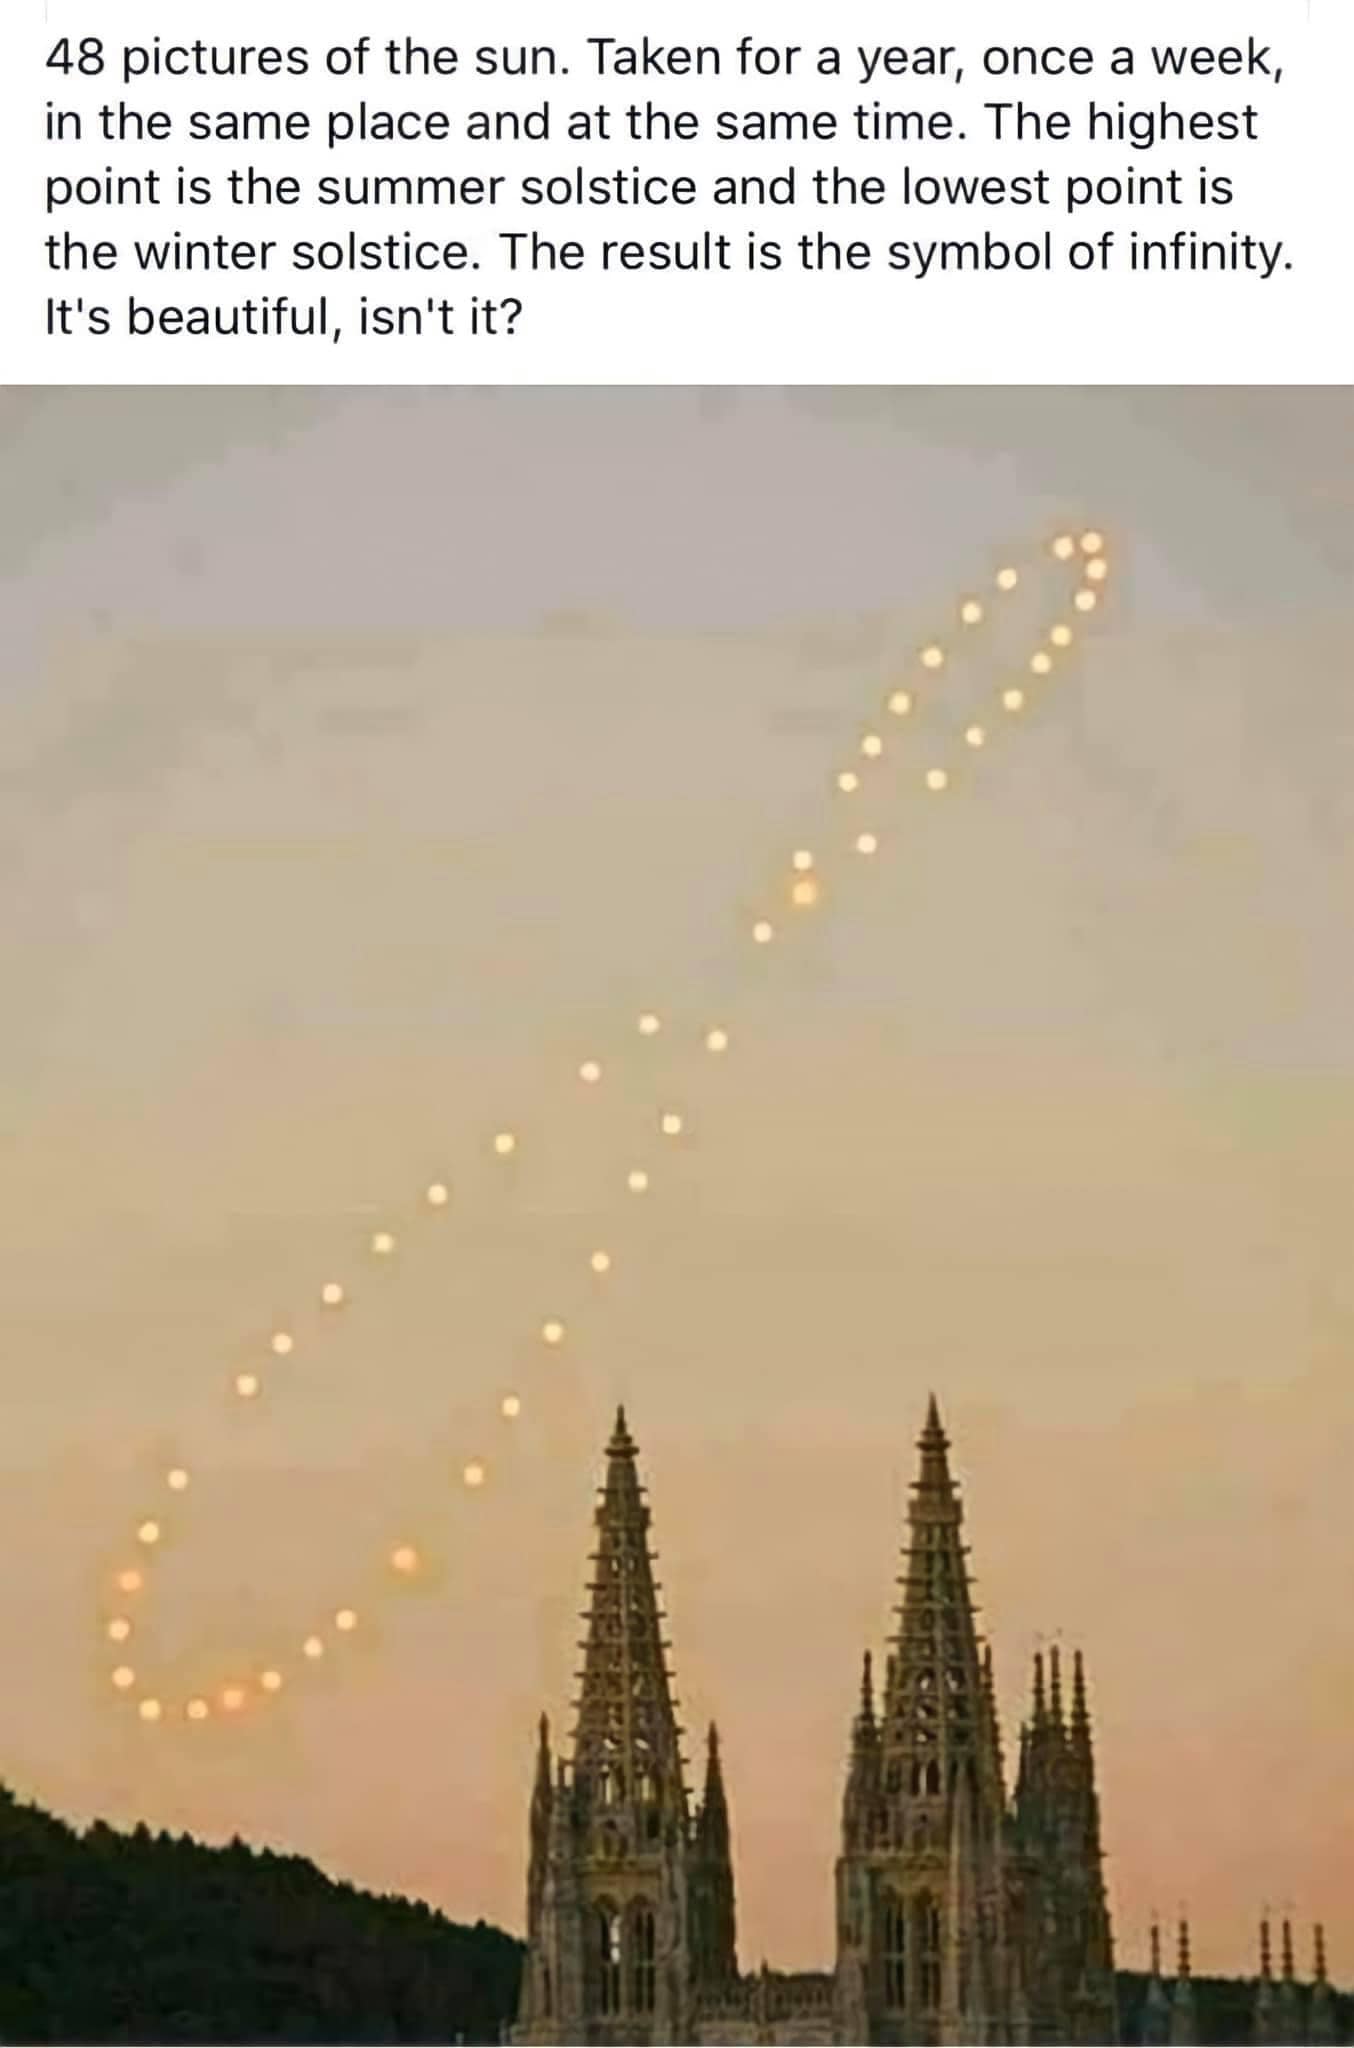 48 pictures of the sun infinity